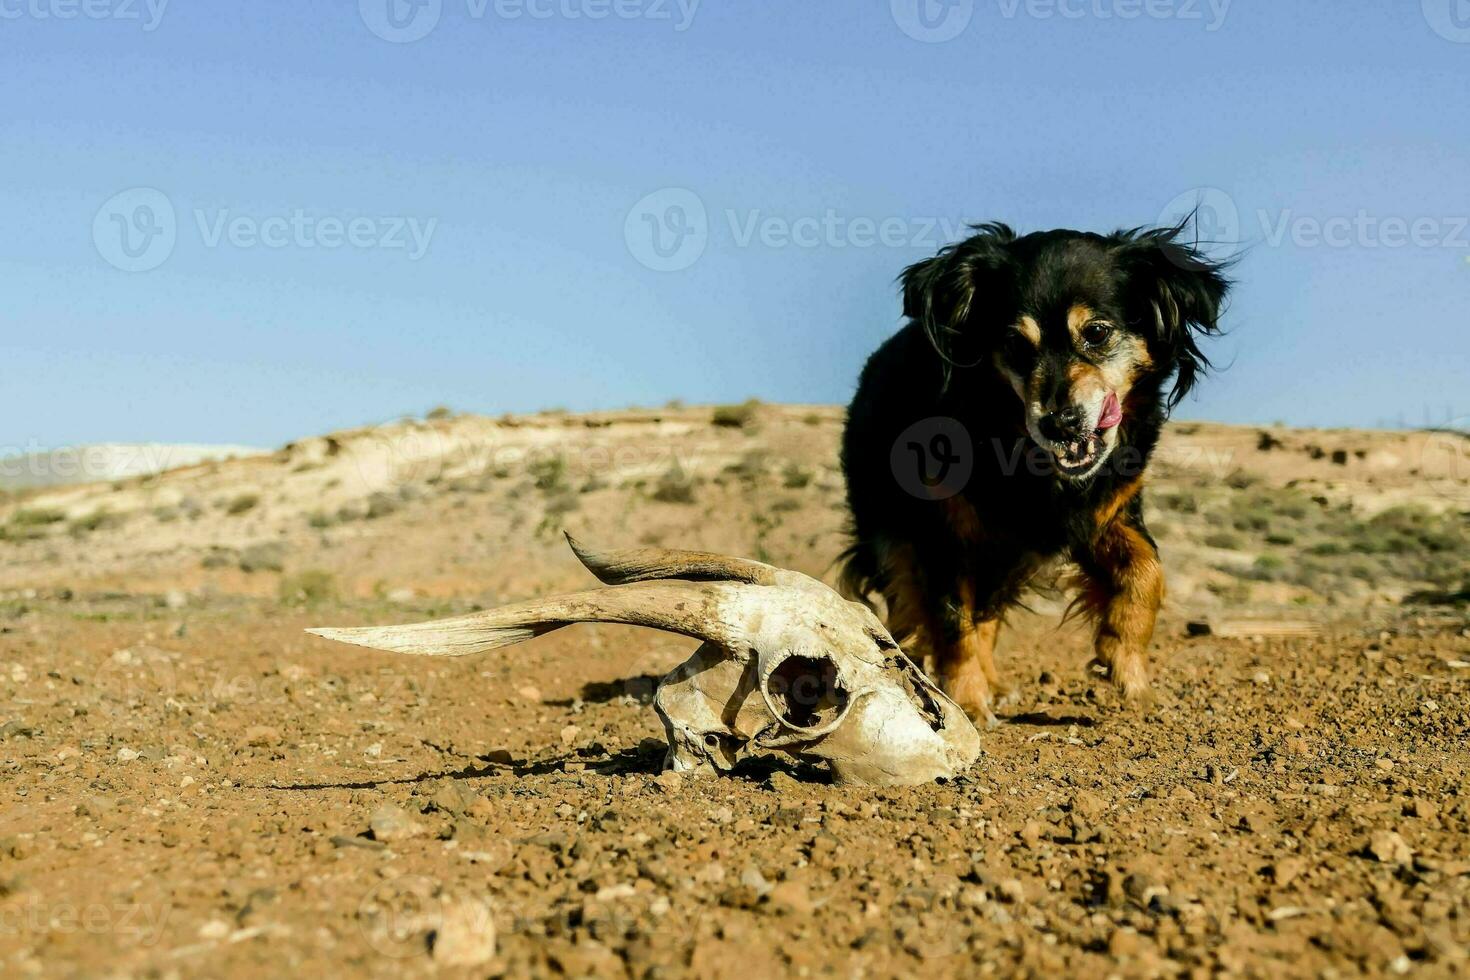 a dog is standing next to a skull photo